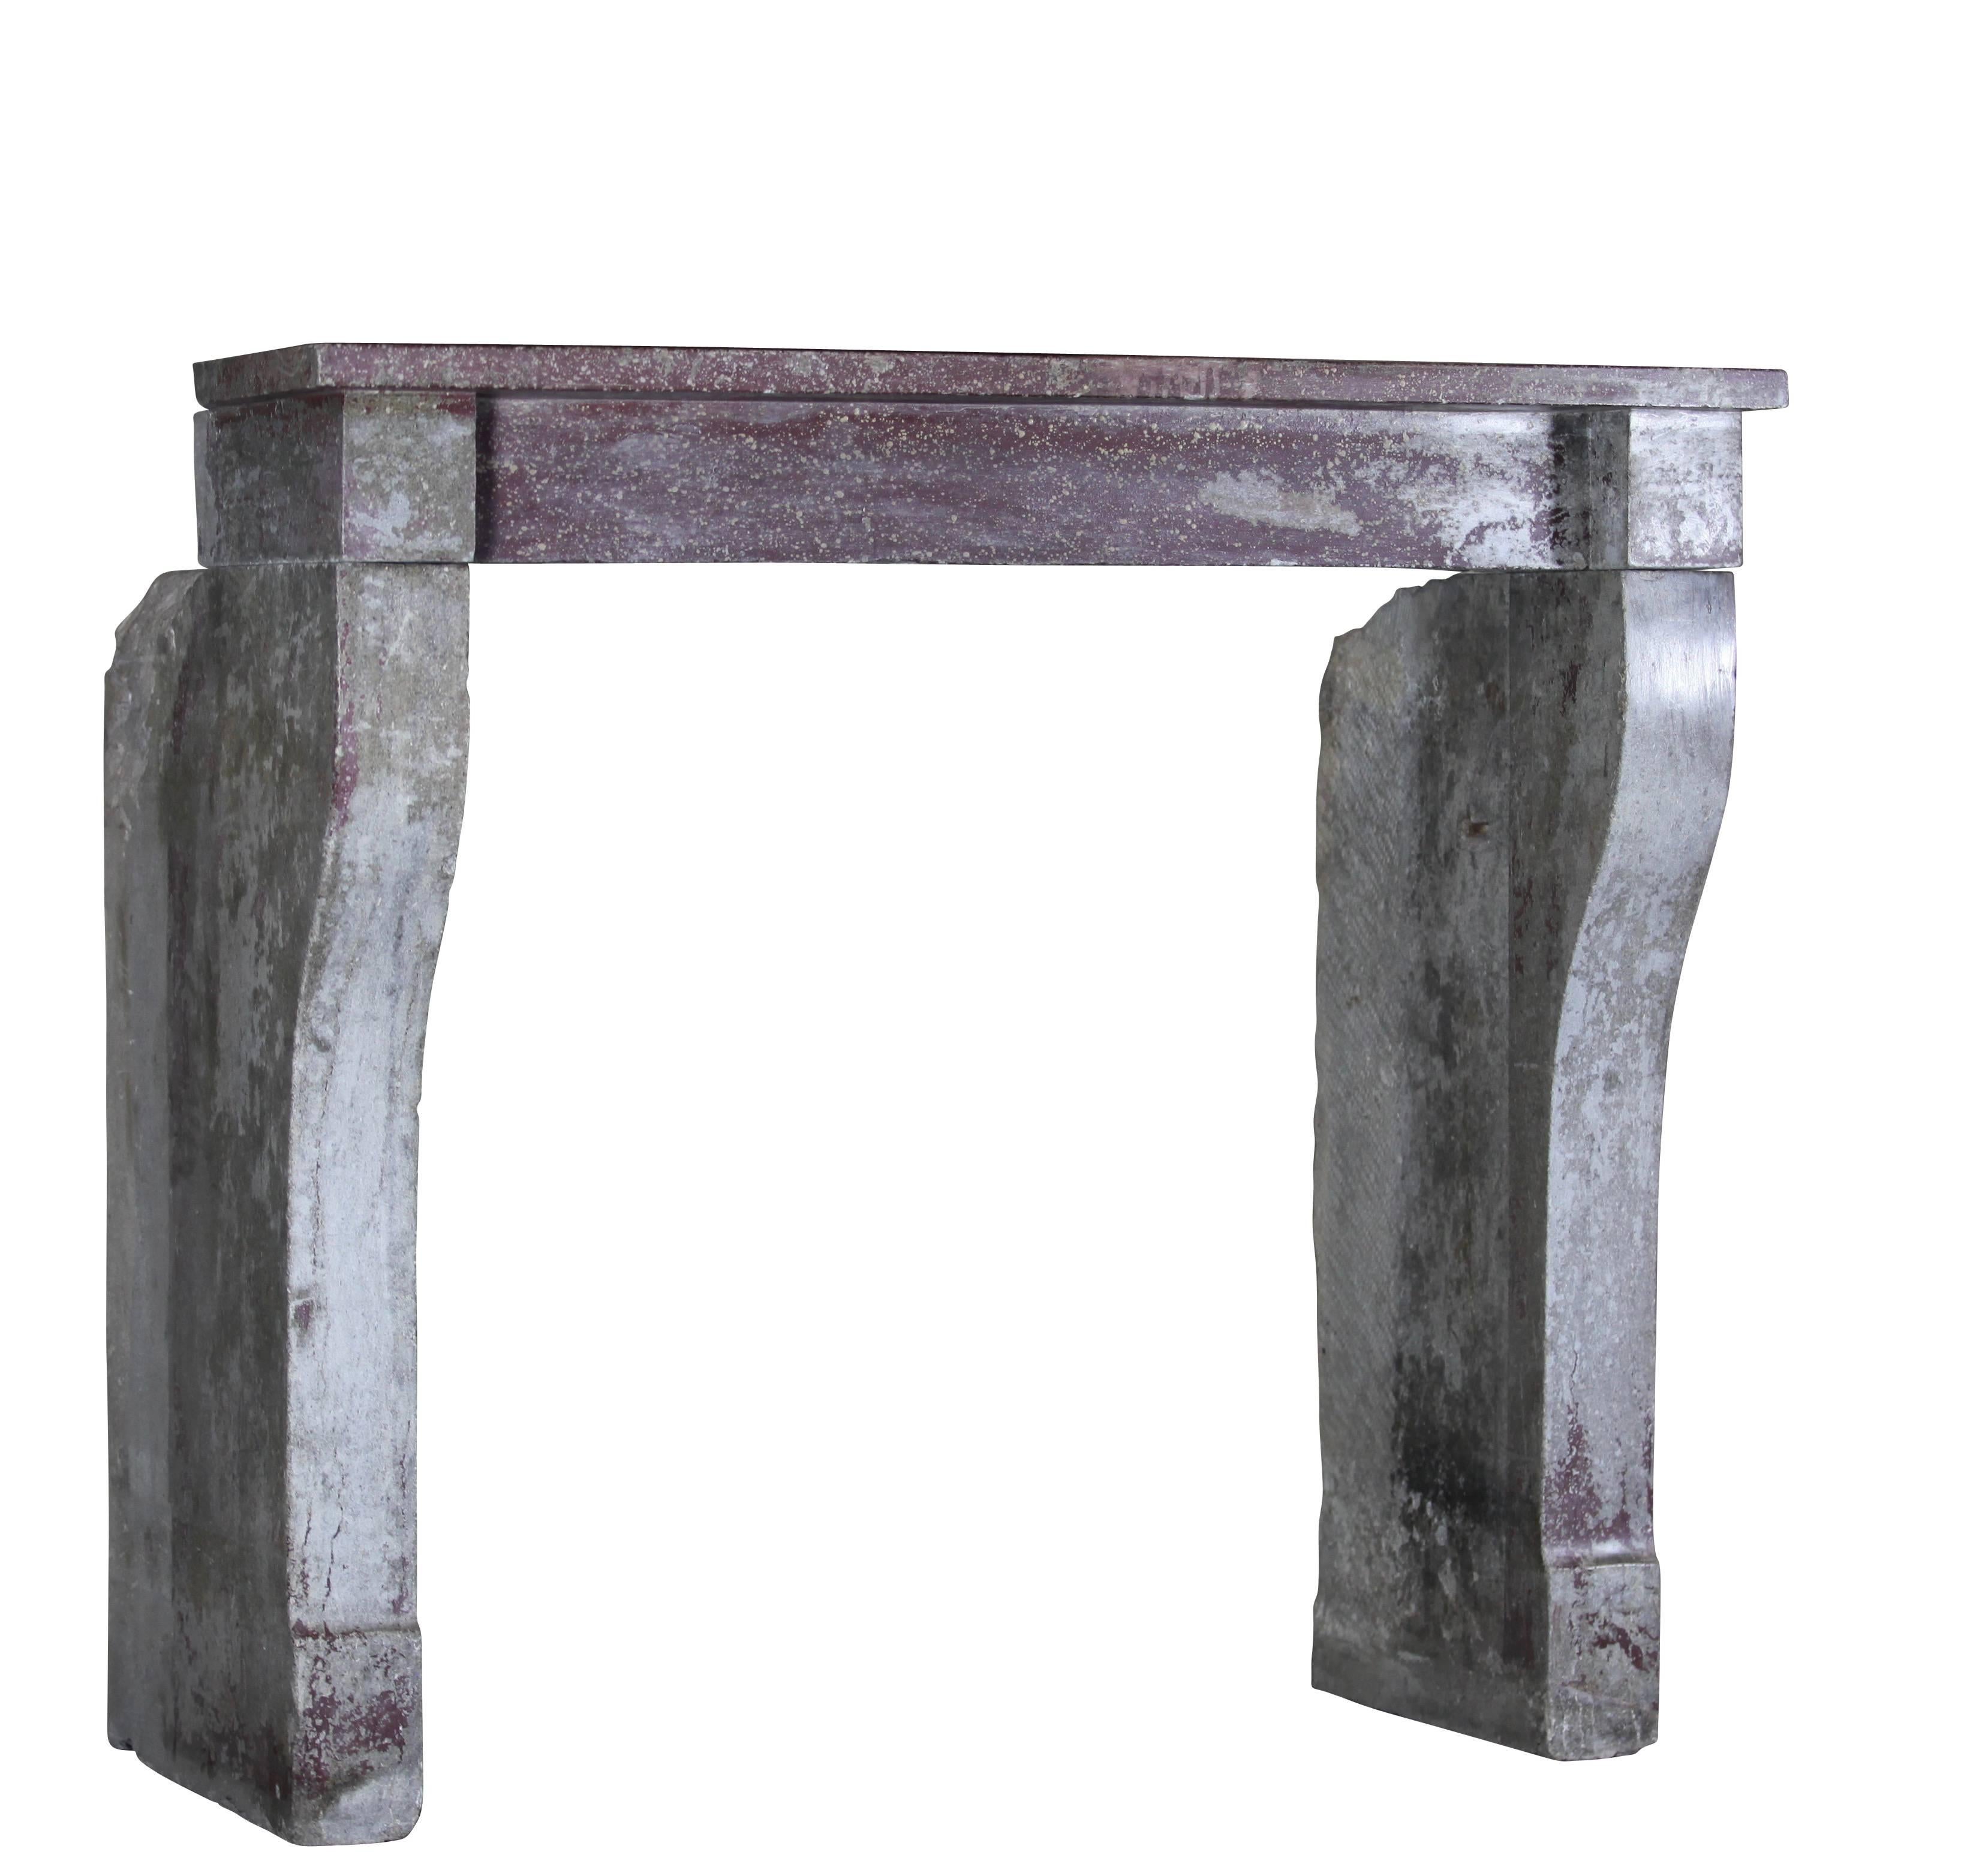 Amazing fireplace surround in burgundy bleu marble hard stone with remaining patina.
Measures:
112 cm EW 44.09",
103 cm EH 40.55",
88 cm IW 34.64",
88 cm IH 34.64",
29 cm S 11.41",
53 cm L 20.86".
300 Kg.